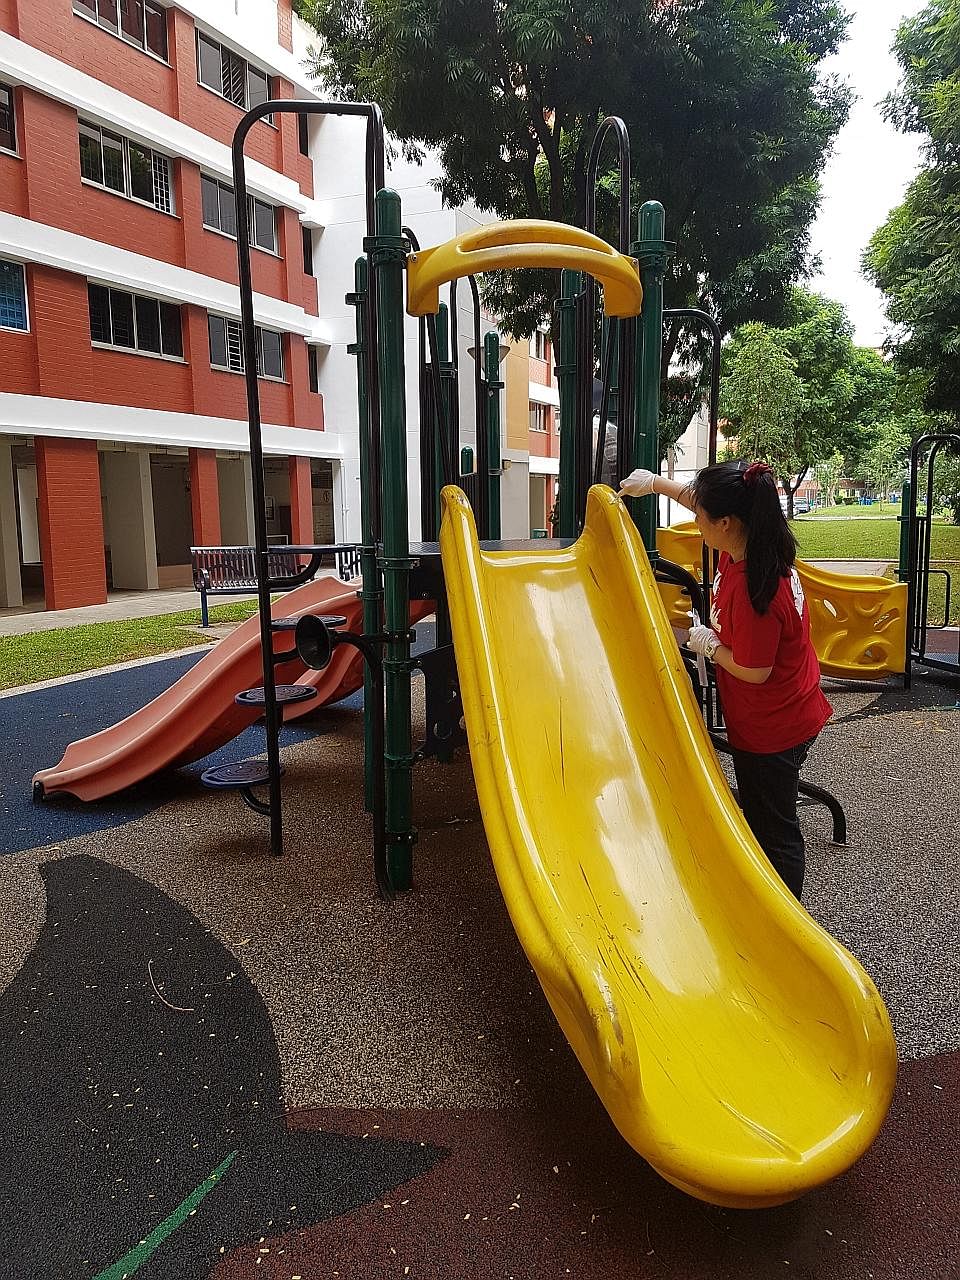 A volunteer from A*Star swabbing the surfaces of a playground in Singapore. The sample is among the 1,000 that will be sent to New York to be analysed for genetic information. The study will give researchers a glimpse of the bacteria, viruses and gen